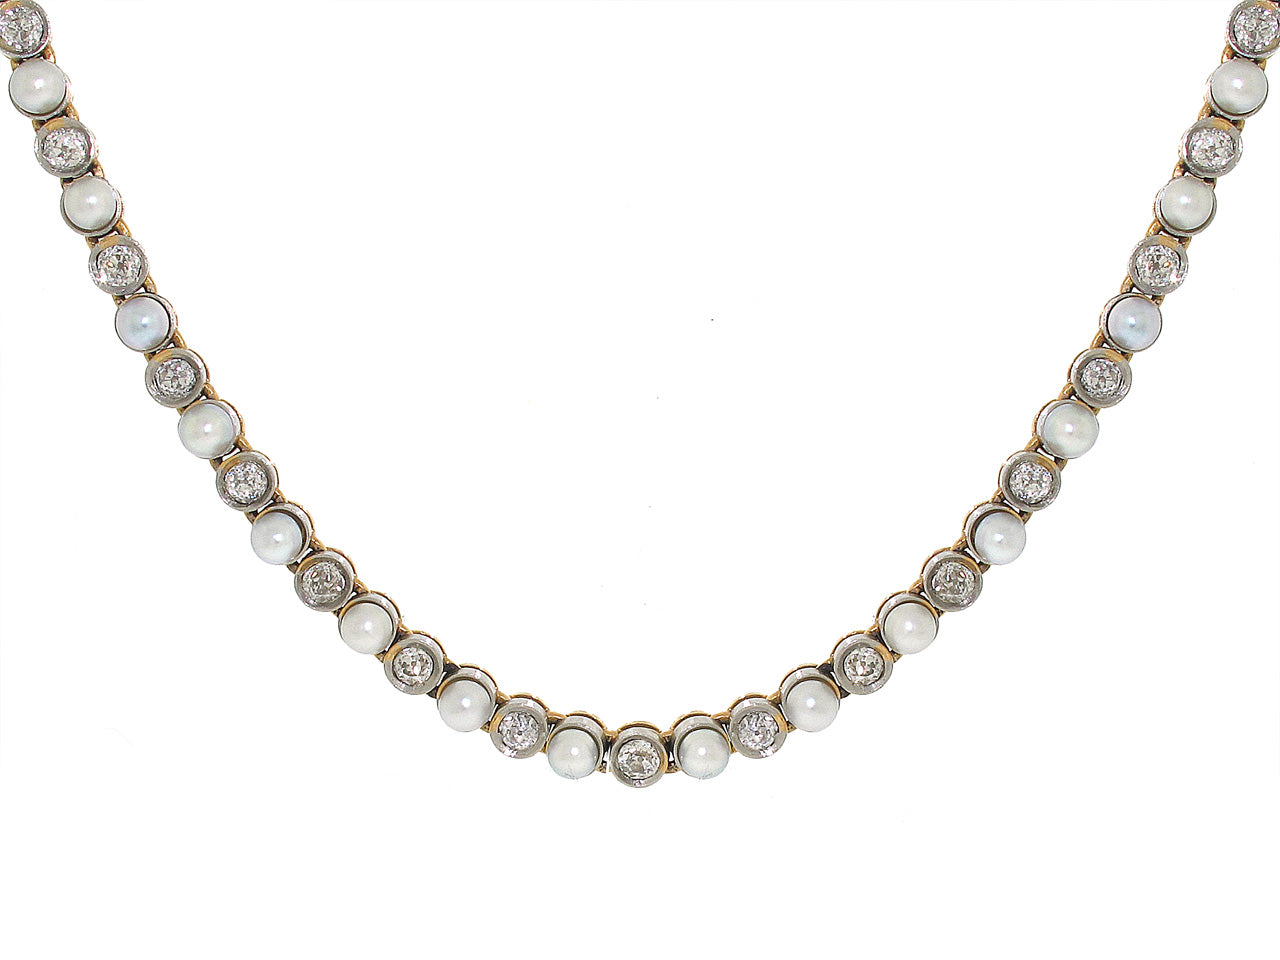 Antique Edwardian Natural Pearl and Diamond Necklace in 14K